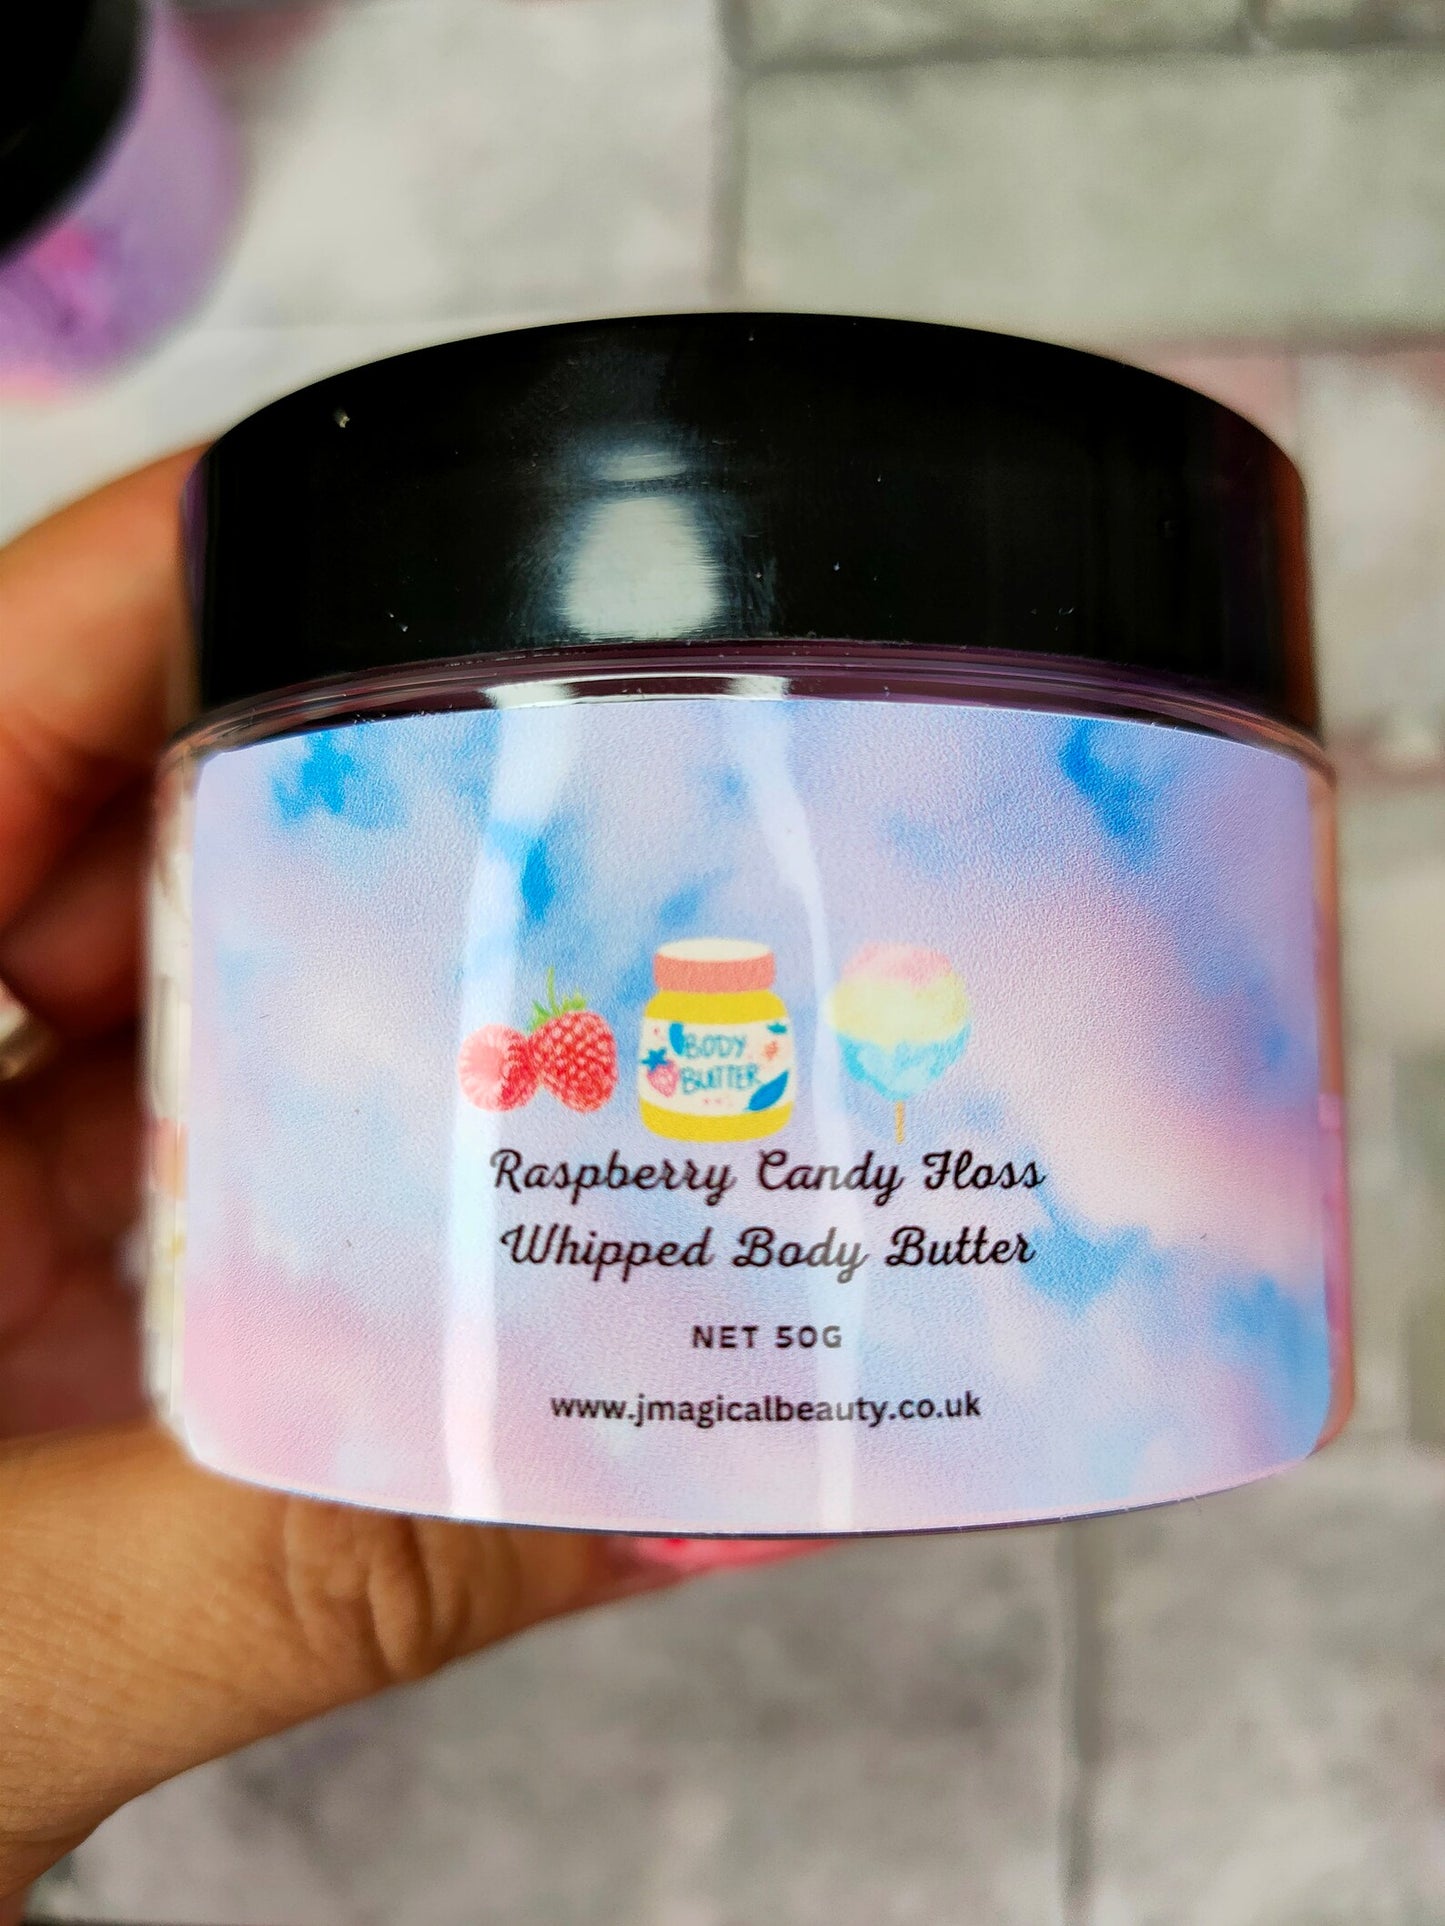 Whipped Body Butter Raspberry Candy Floss scent